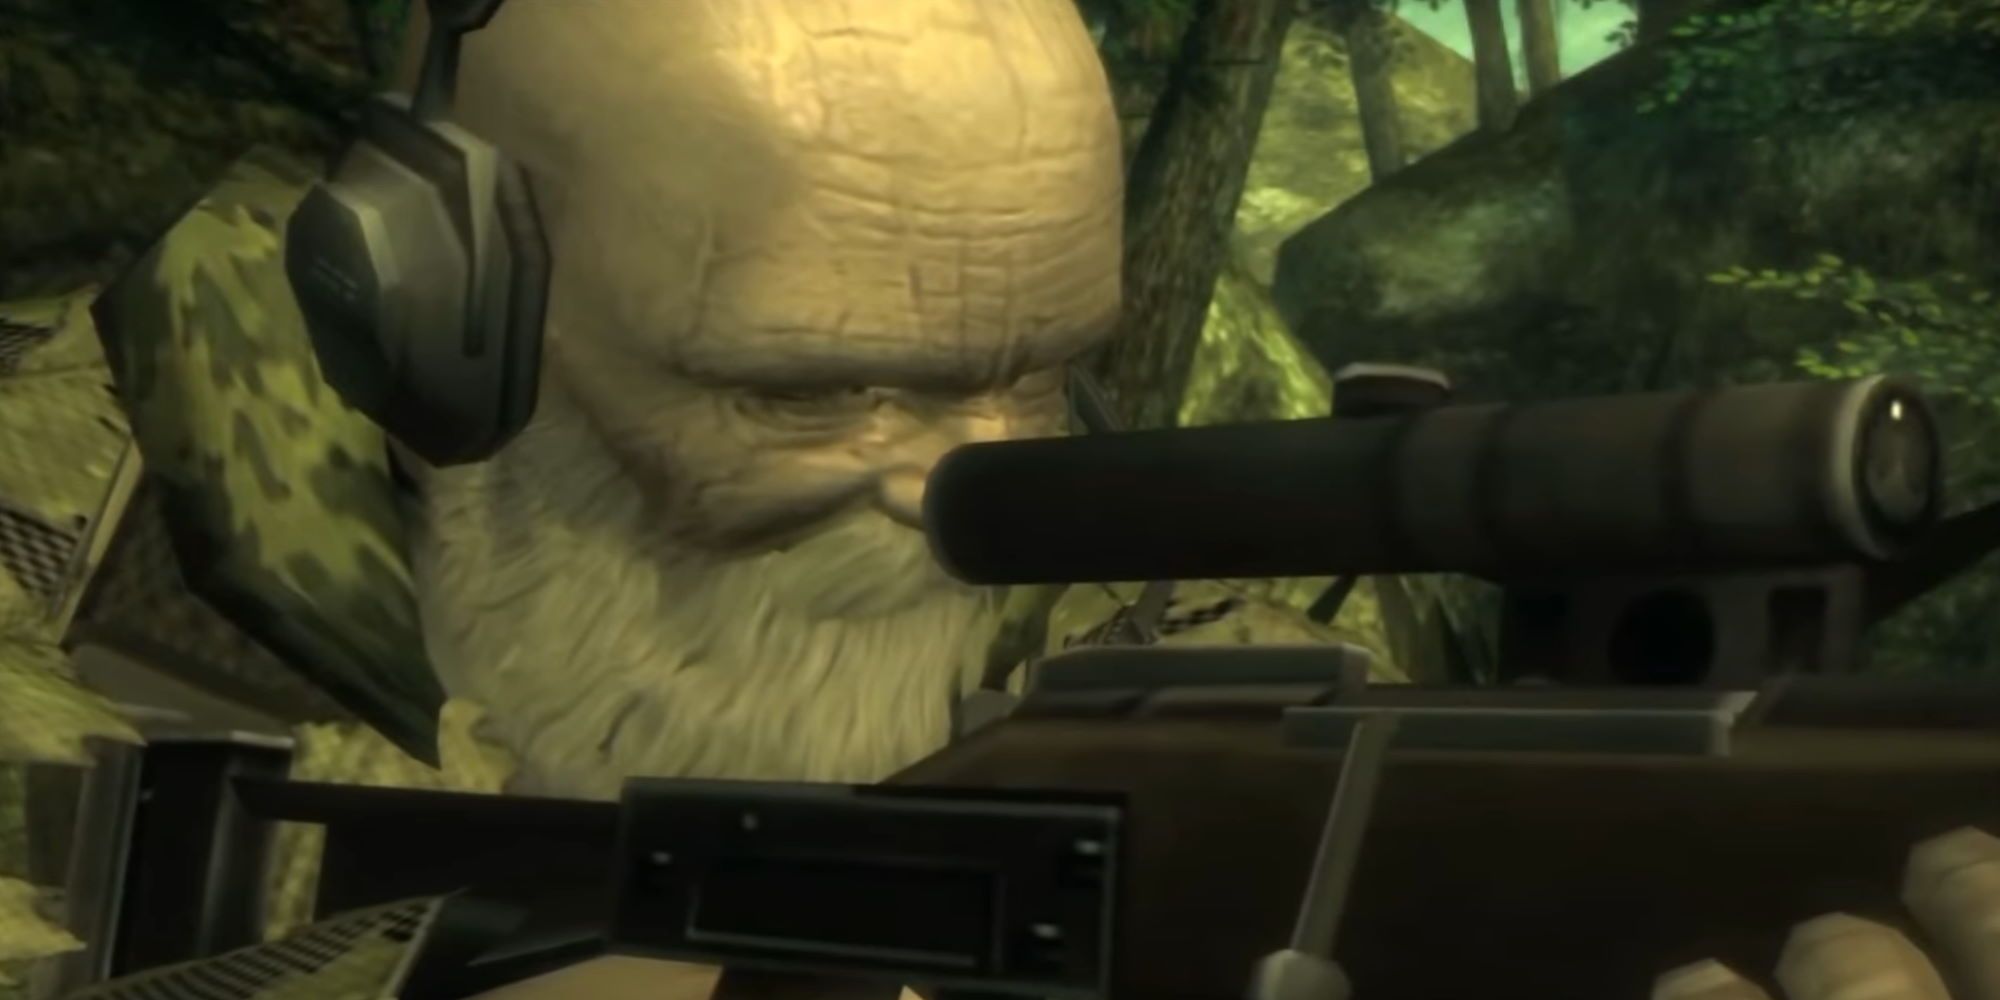 The End Aiming down the scope of his Sniper Rifle in the jungle Metal Gear Solid 3